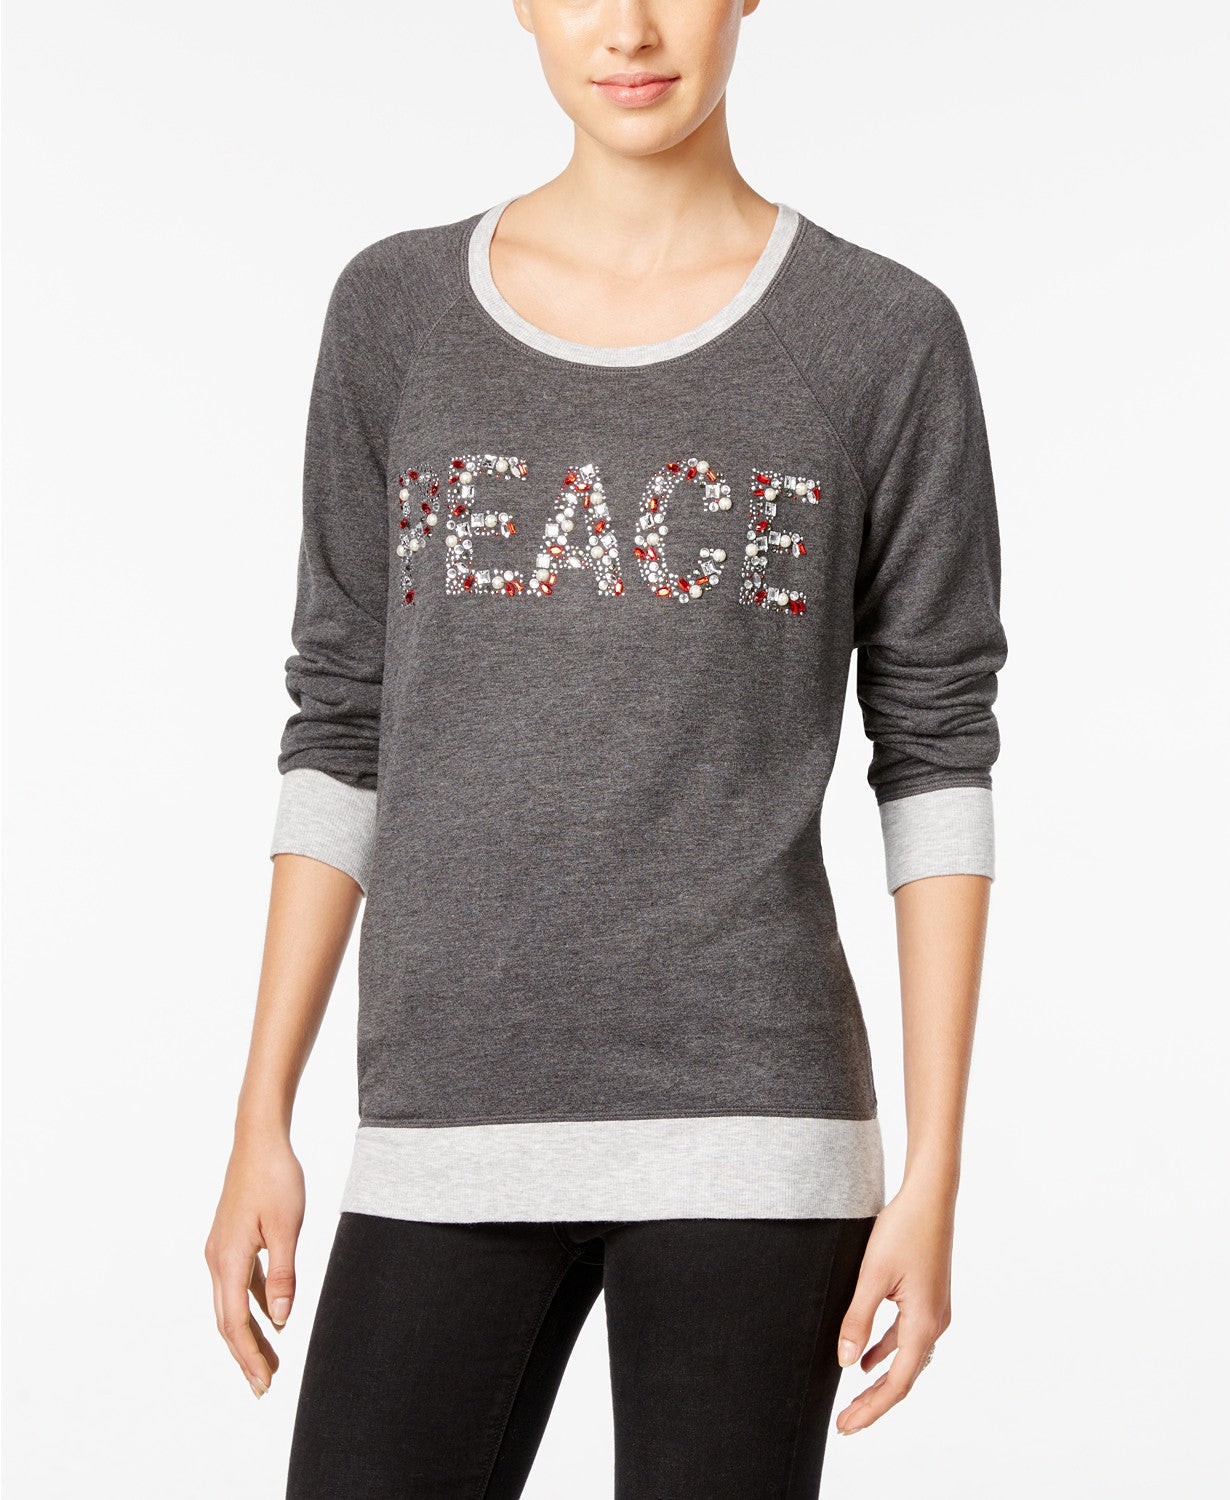 Style Co Petite Embellished Peace Top Grey Heather PM